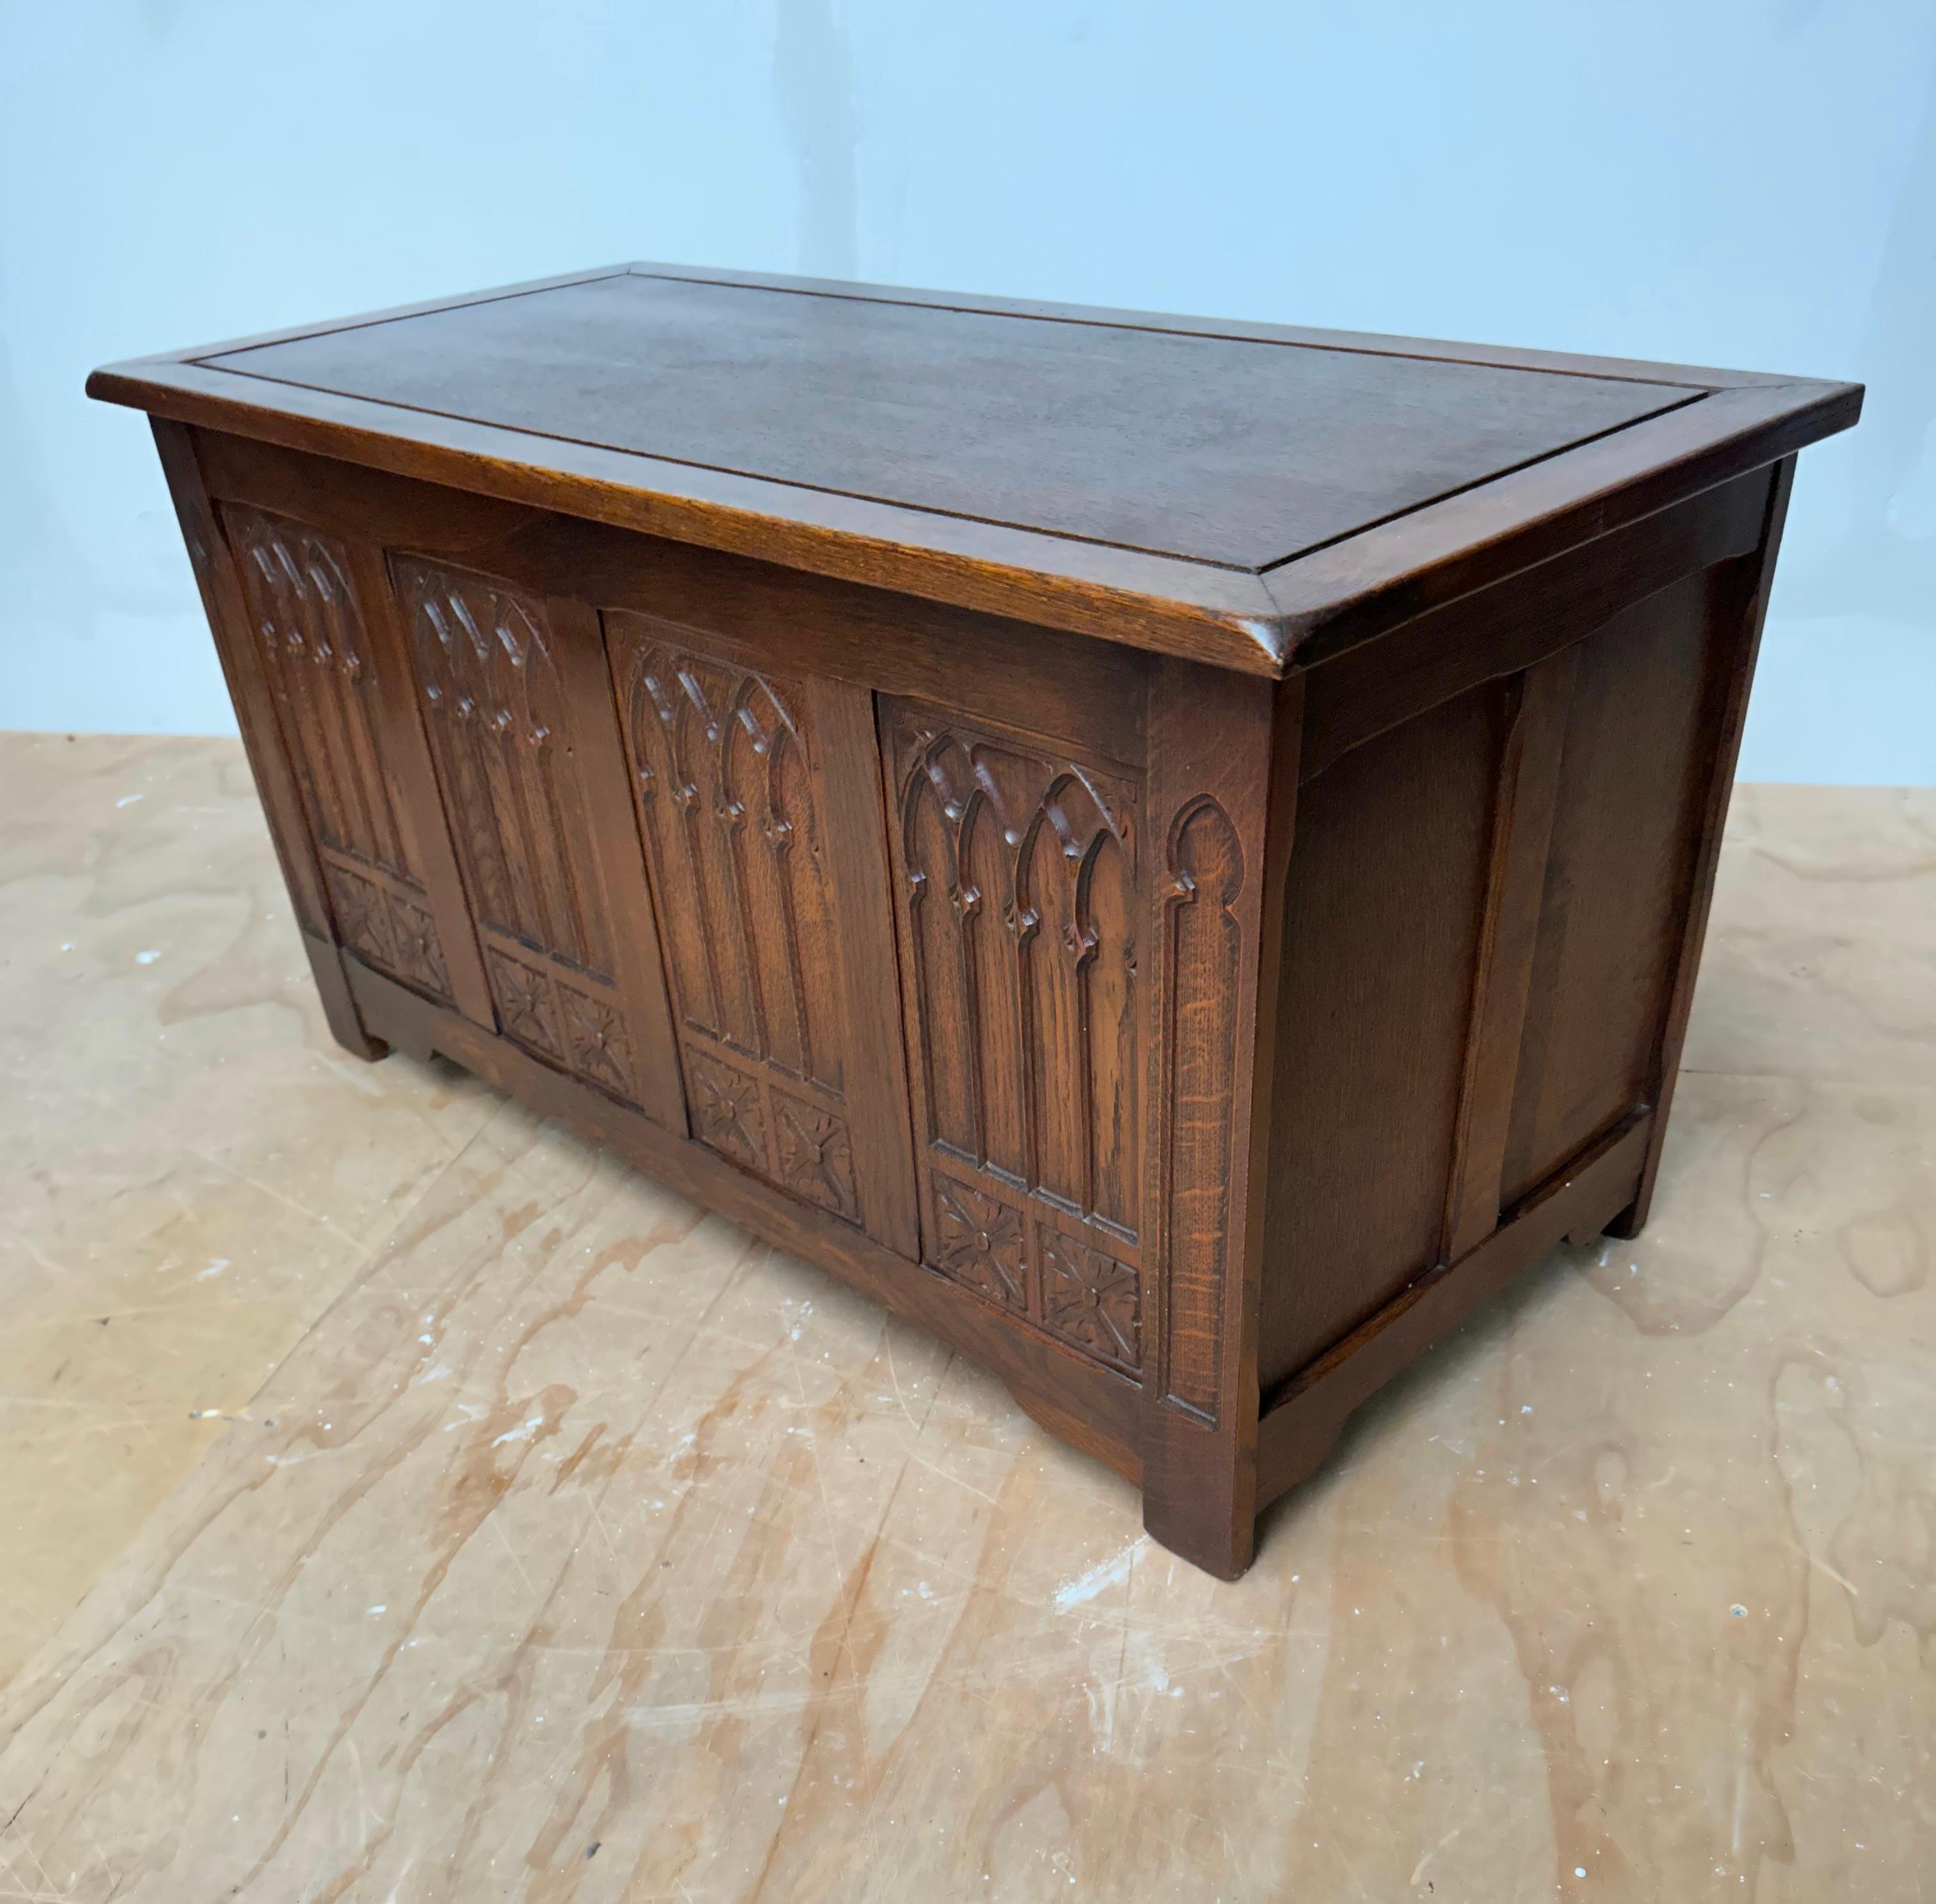 Wonderful Gothic Revival box / chest with an amazing presence.

If you like great condition Gothic Revival furniture then we are certain you will like this quality carved and intricate chest. This fine and practical specimen comes with perfectly